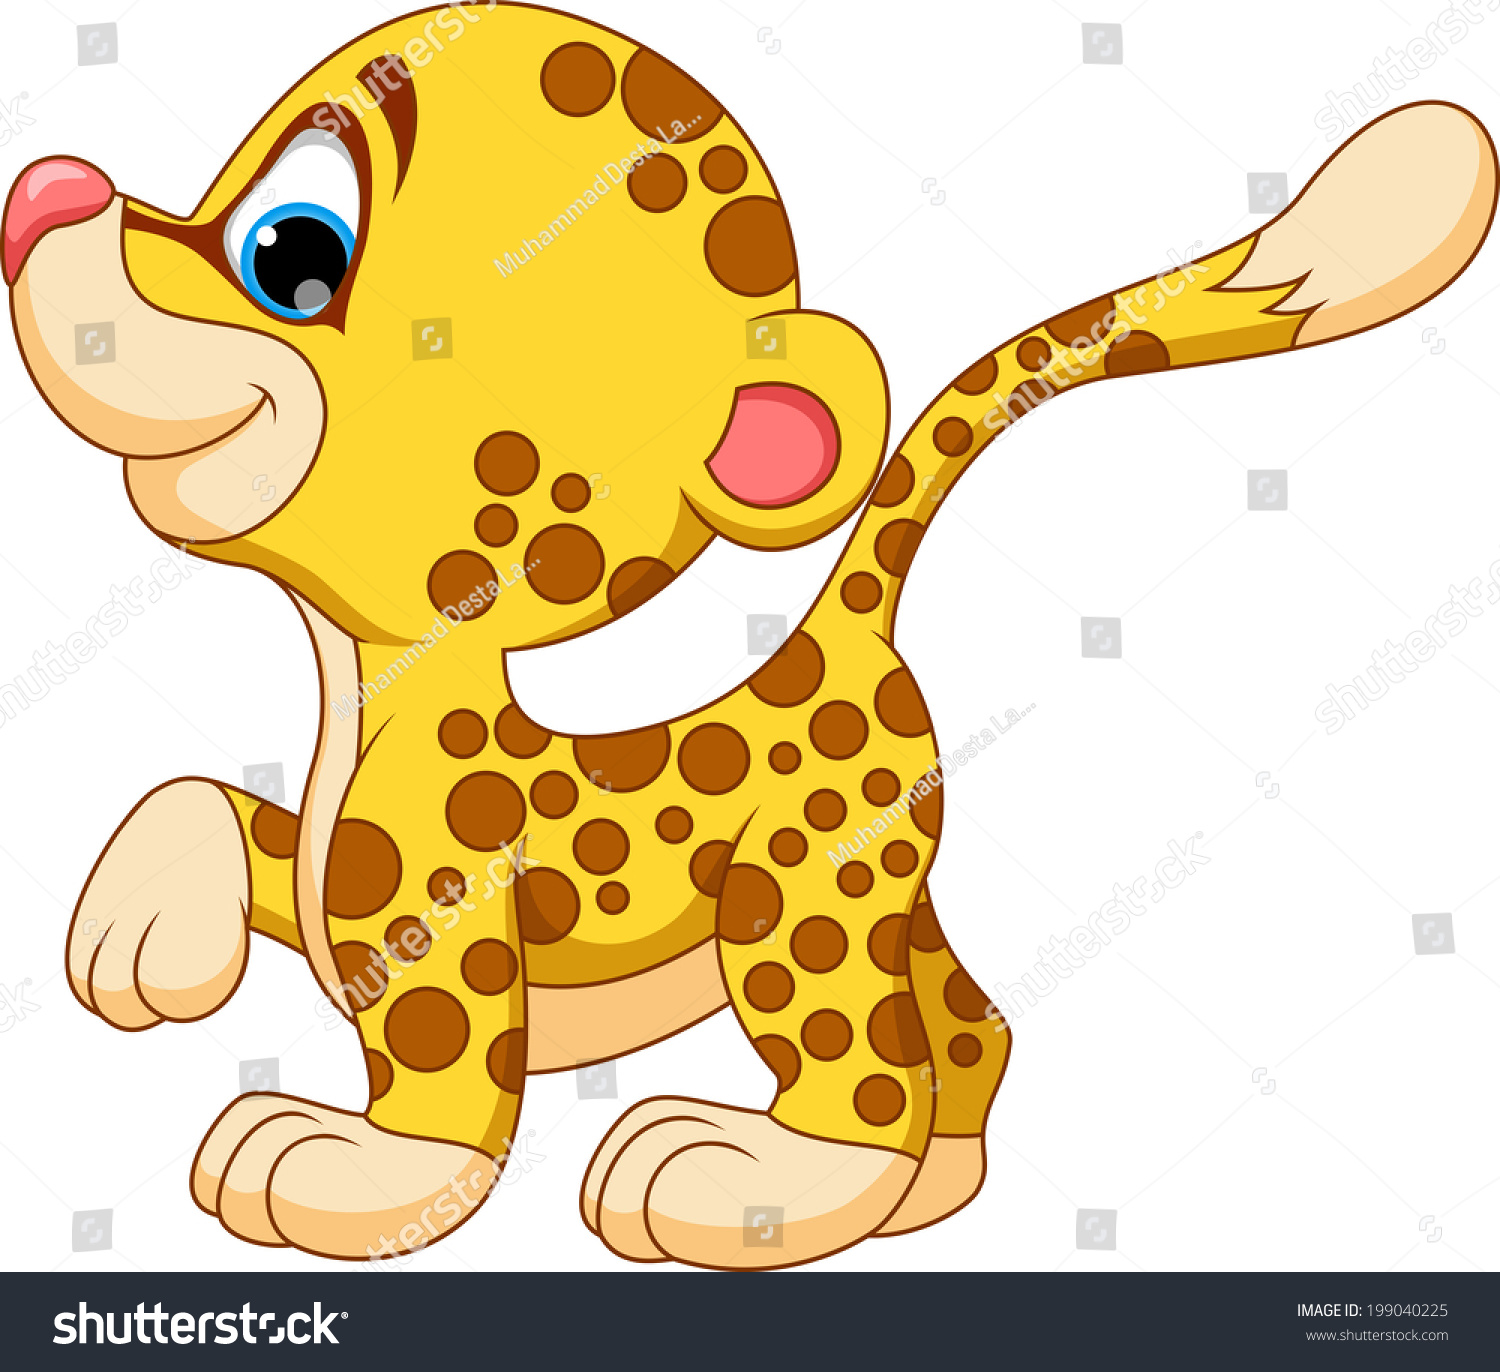 Download HD Free Leopard Jaguar Illustration - Angry Cheetah Face Drawing Transparent PNG Image ...